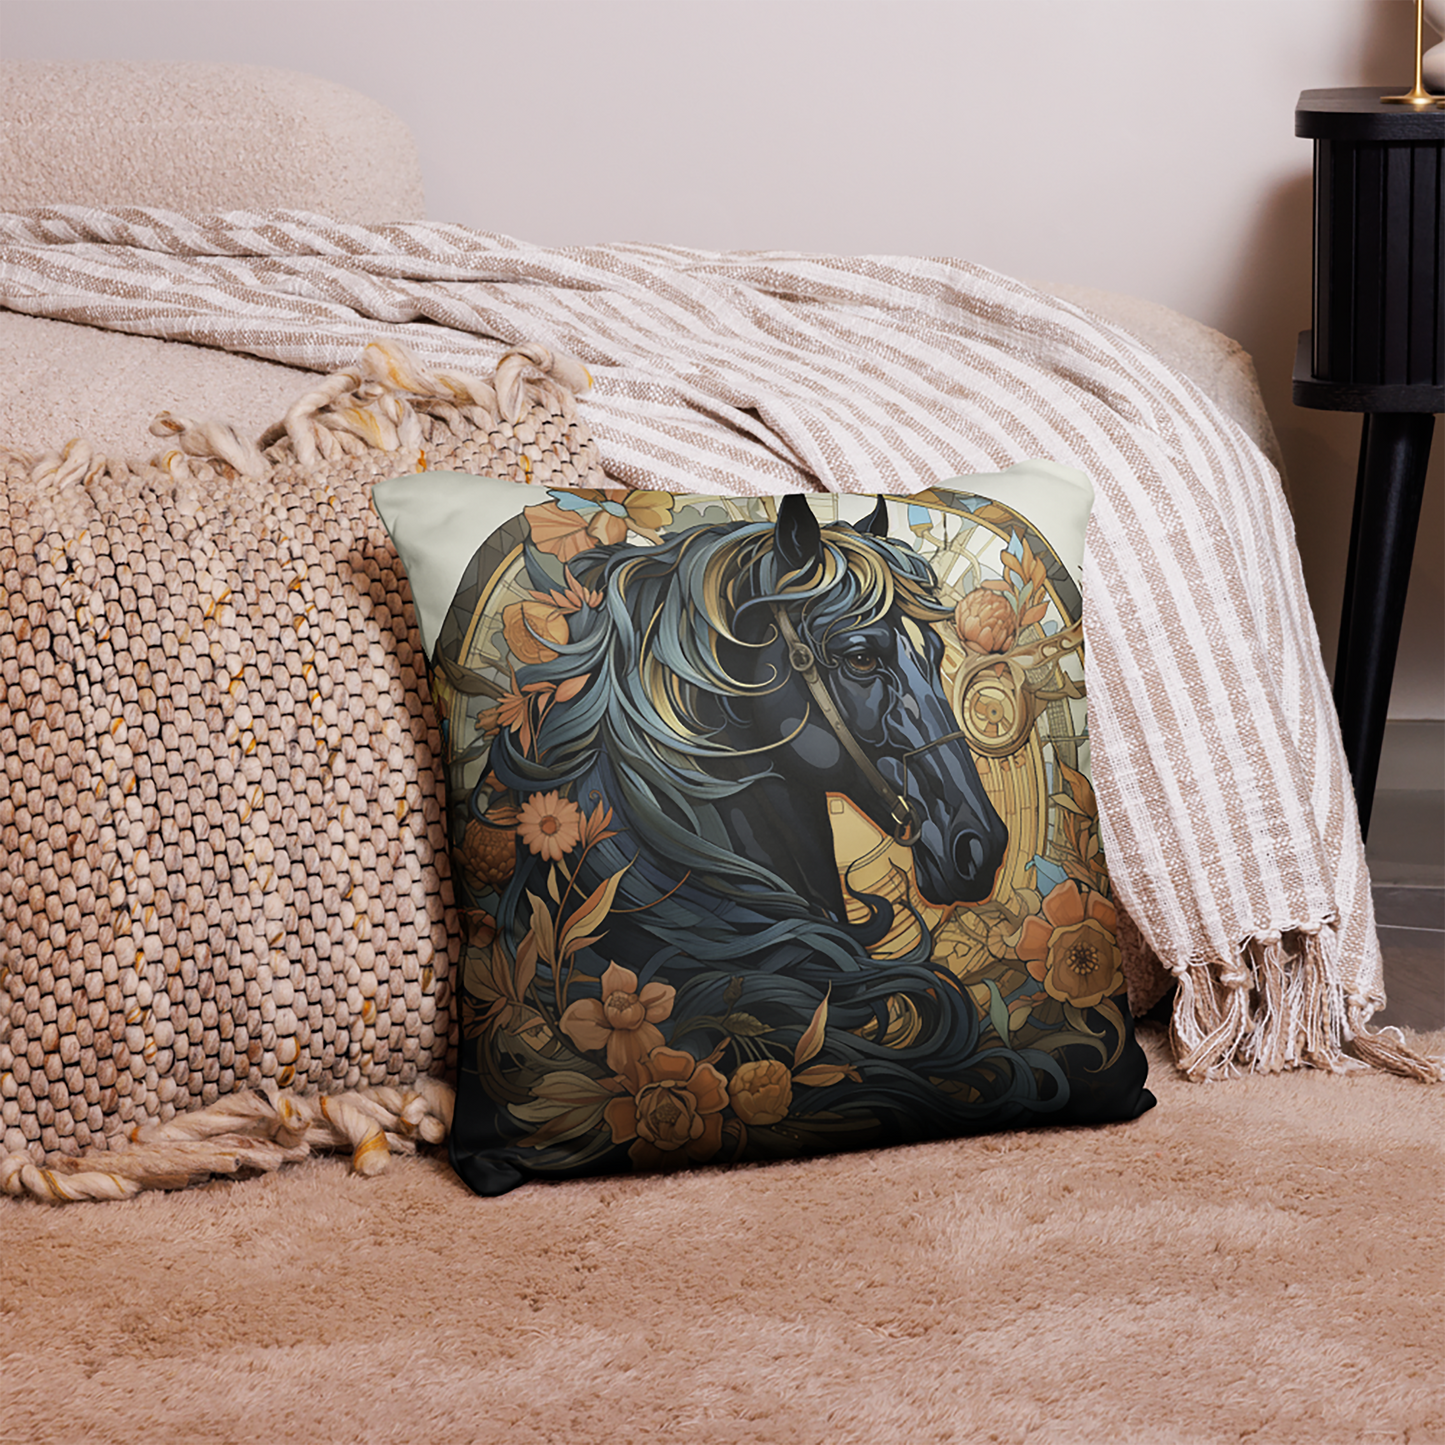 Horse Throw Pillow Dark Horse and Floral Charm Polyester Decorative Cushion 18x18